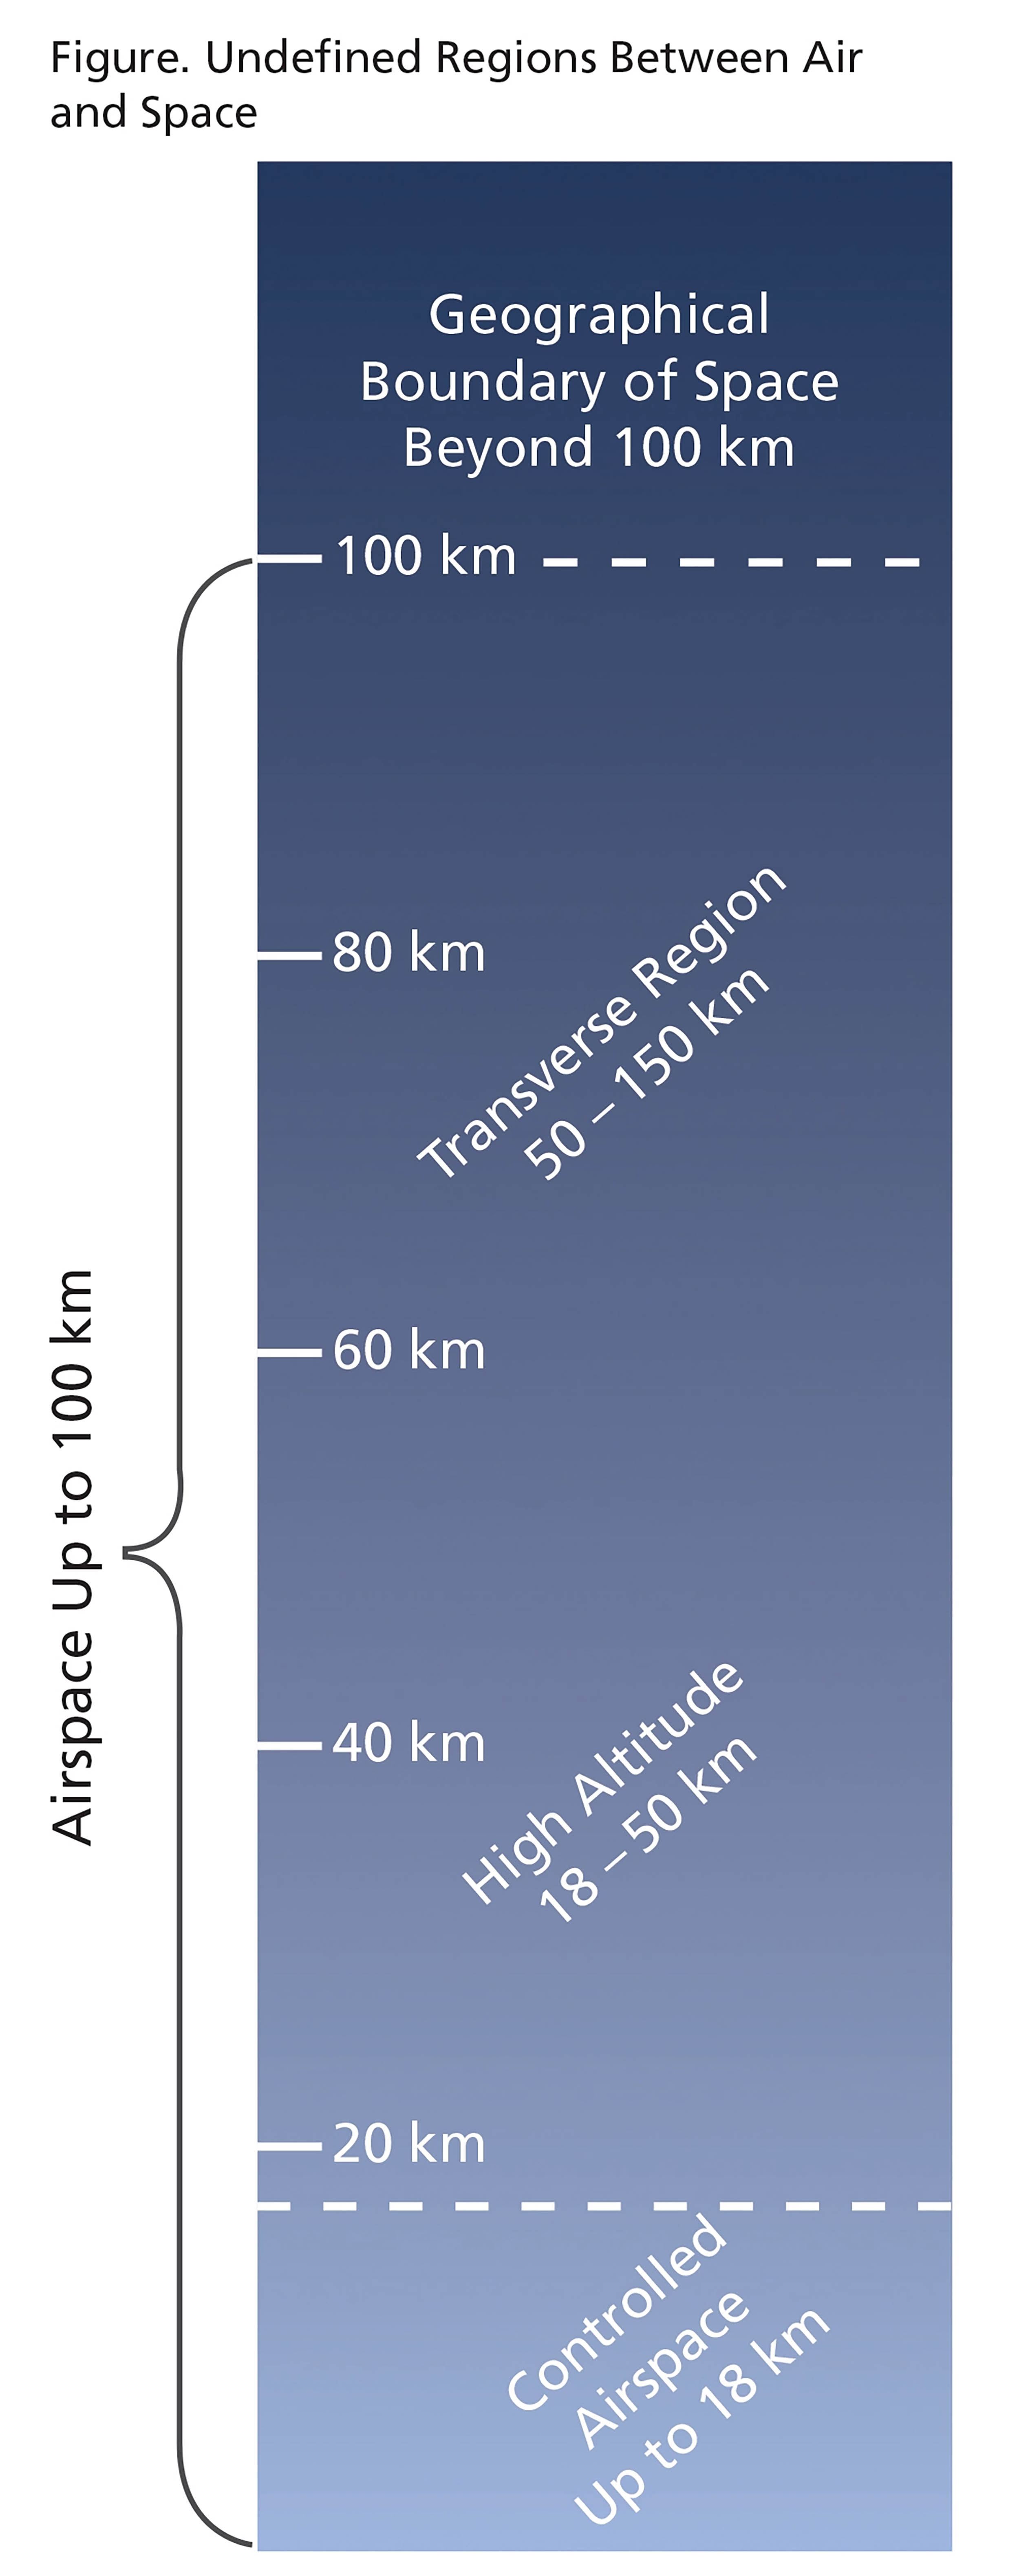 Figure. Undefined Regions Between Air and Space